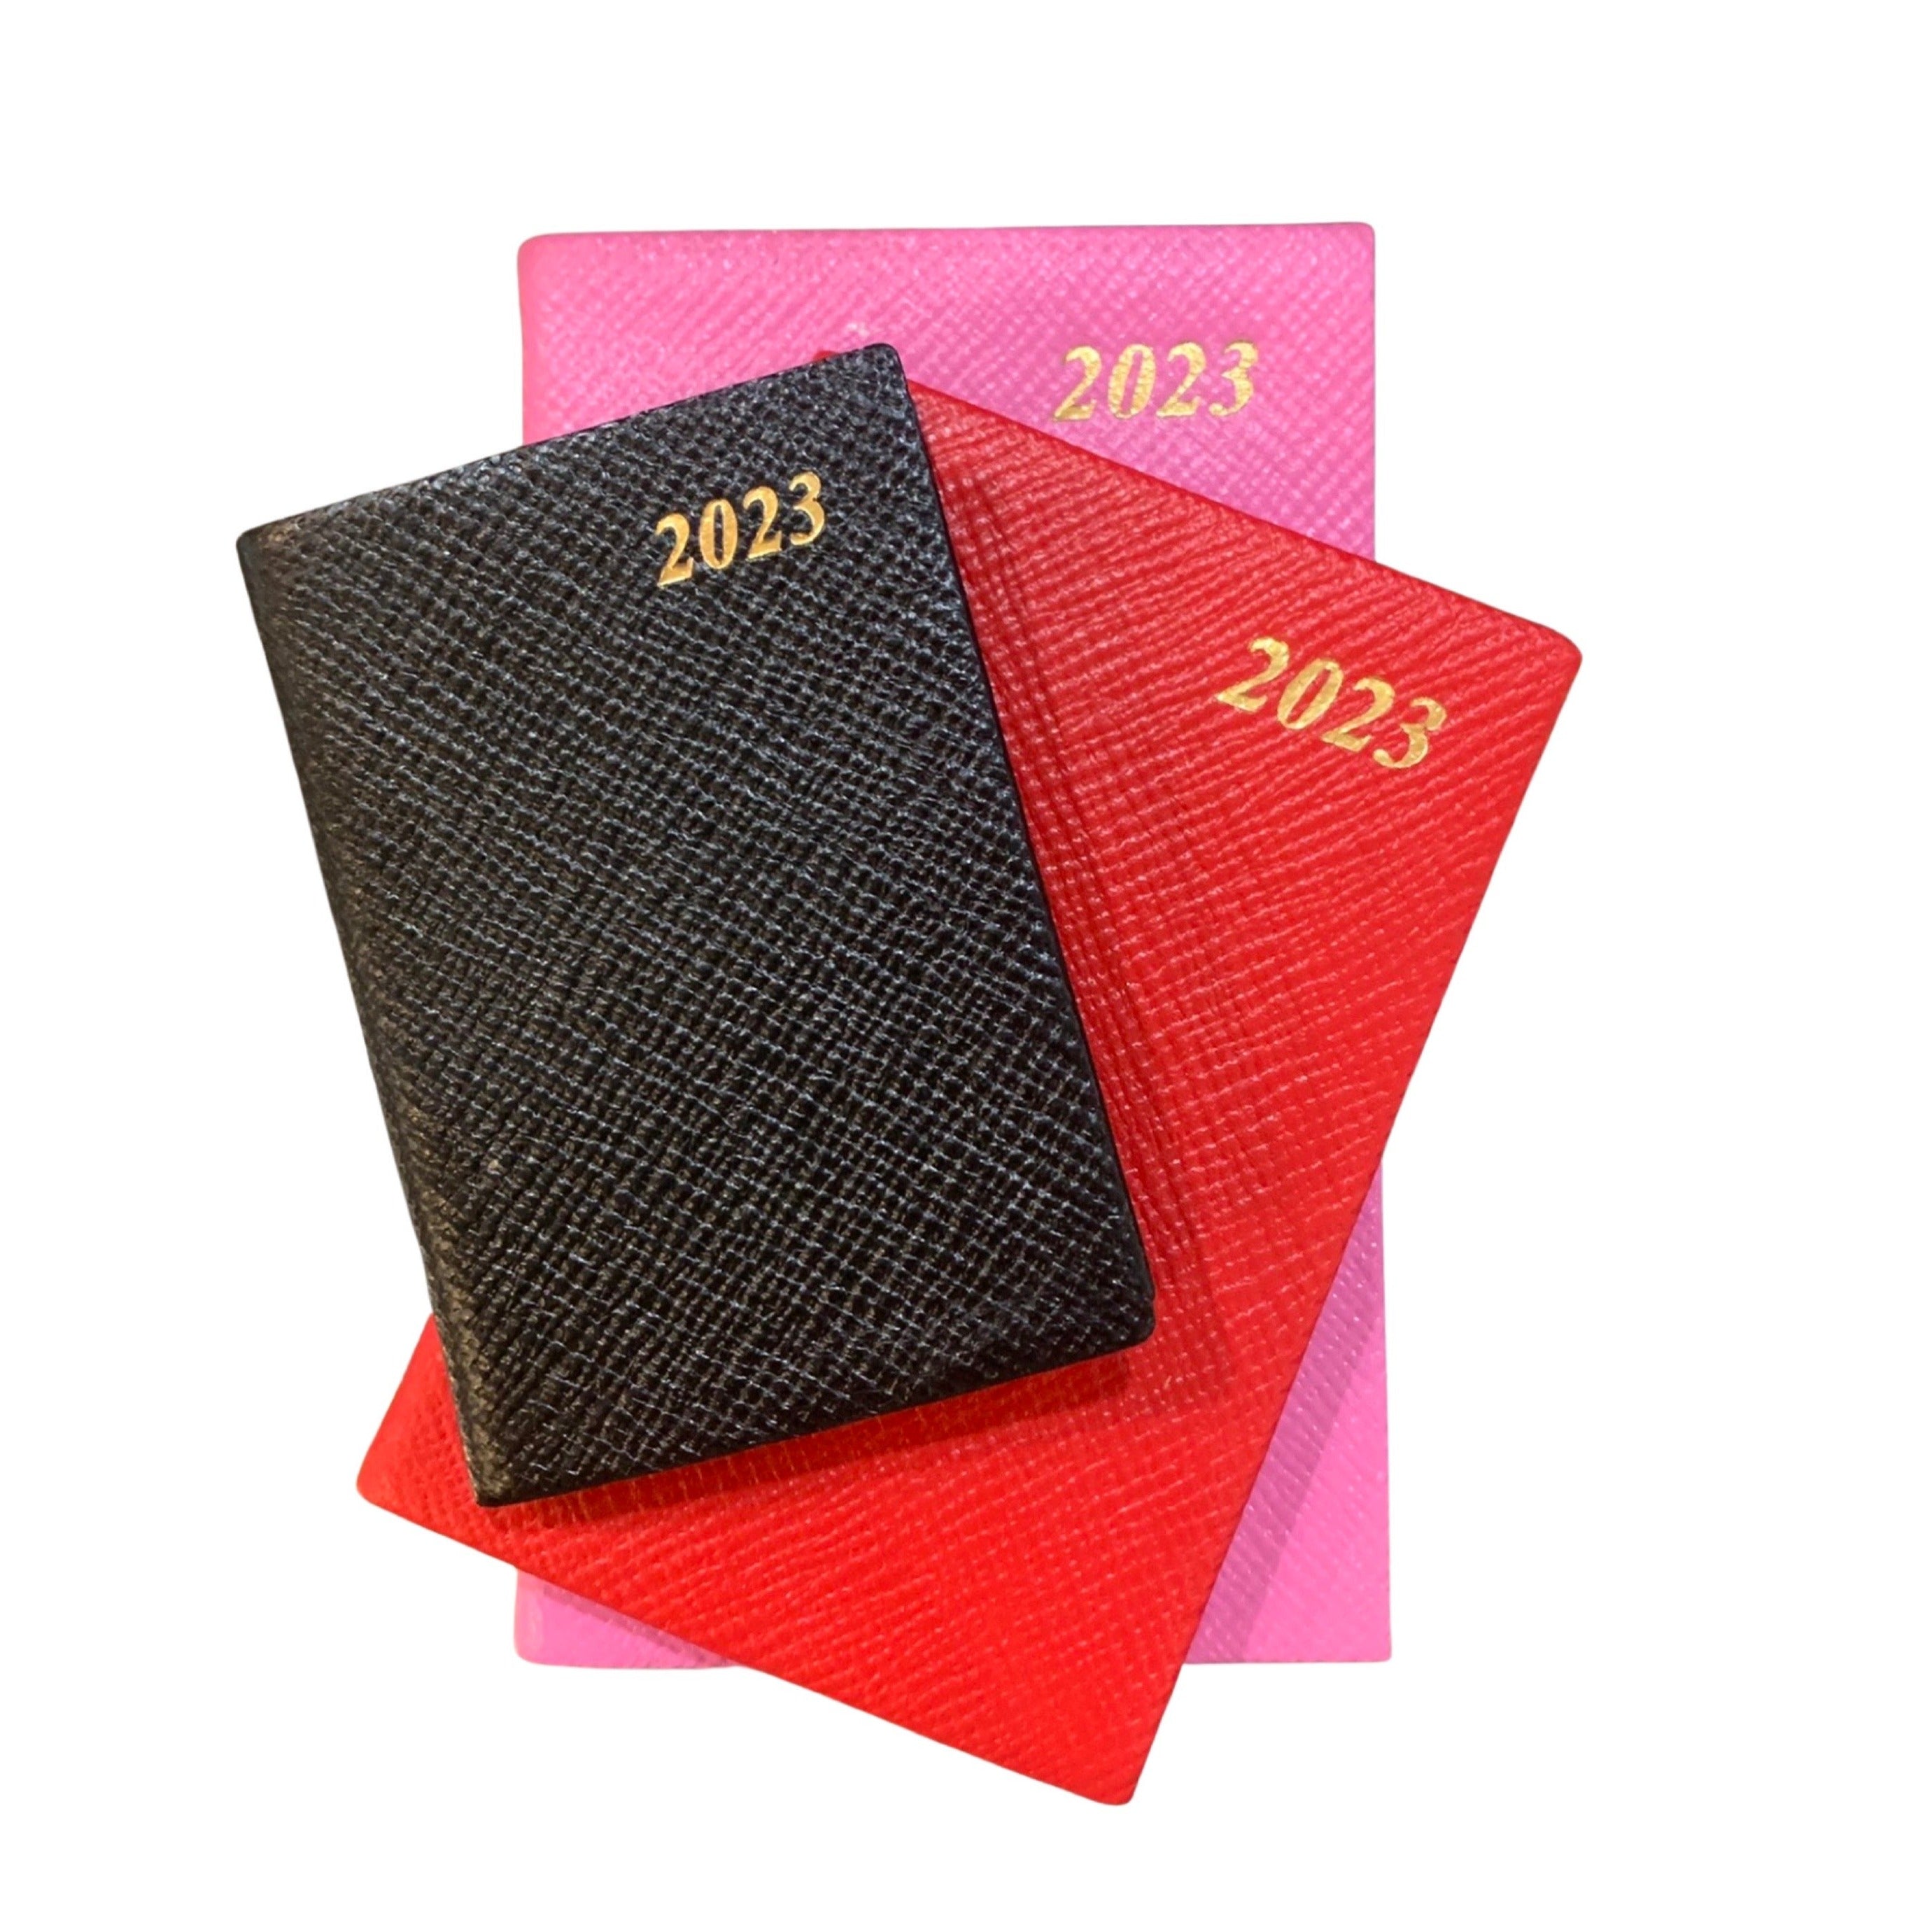 Charing Cross  2023 Leather Planner Calendar with Pencil and Clip